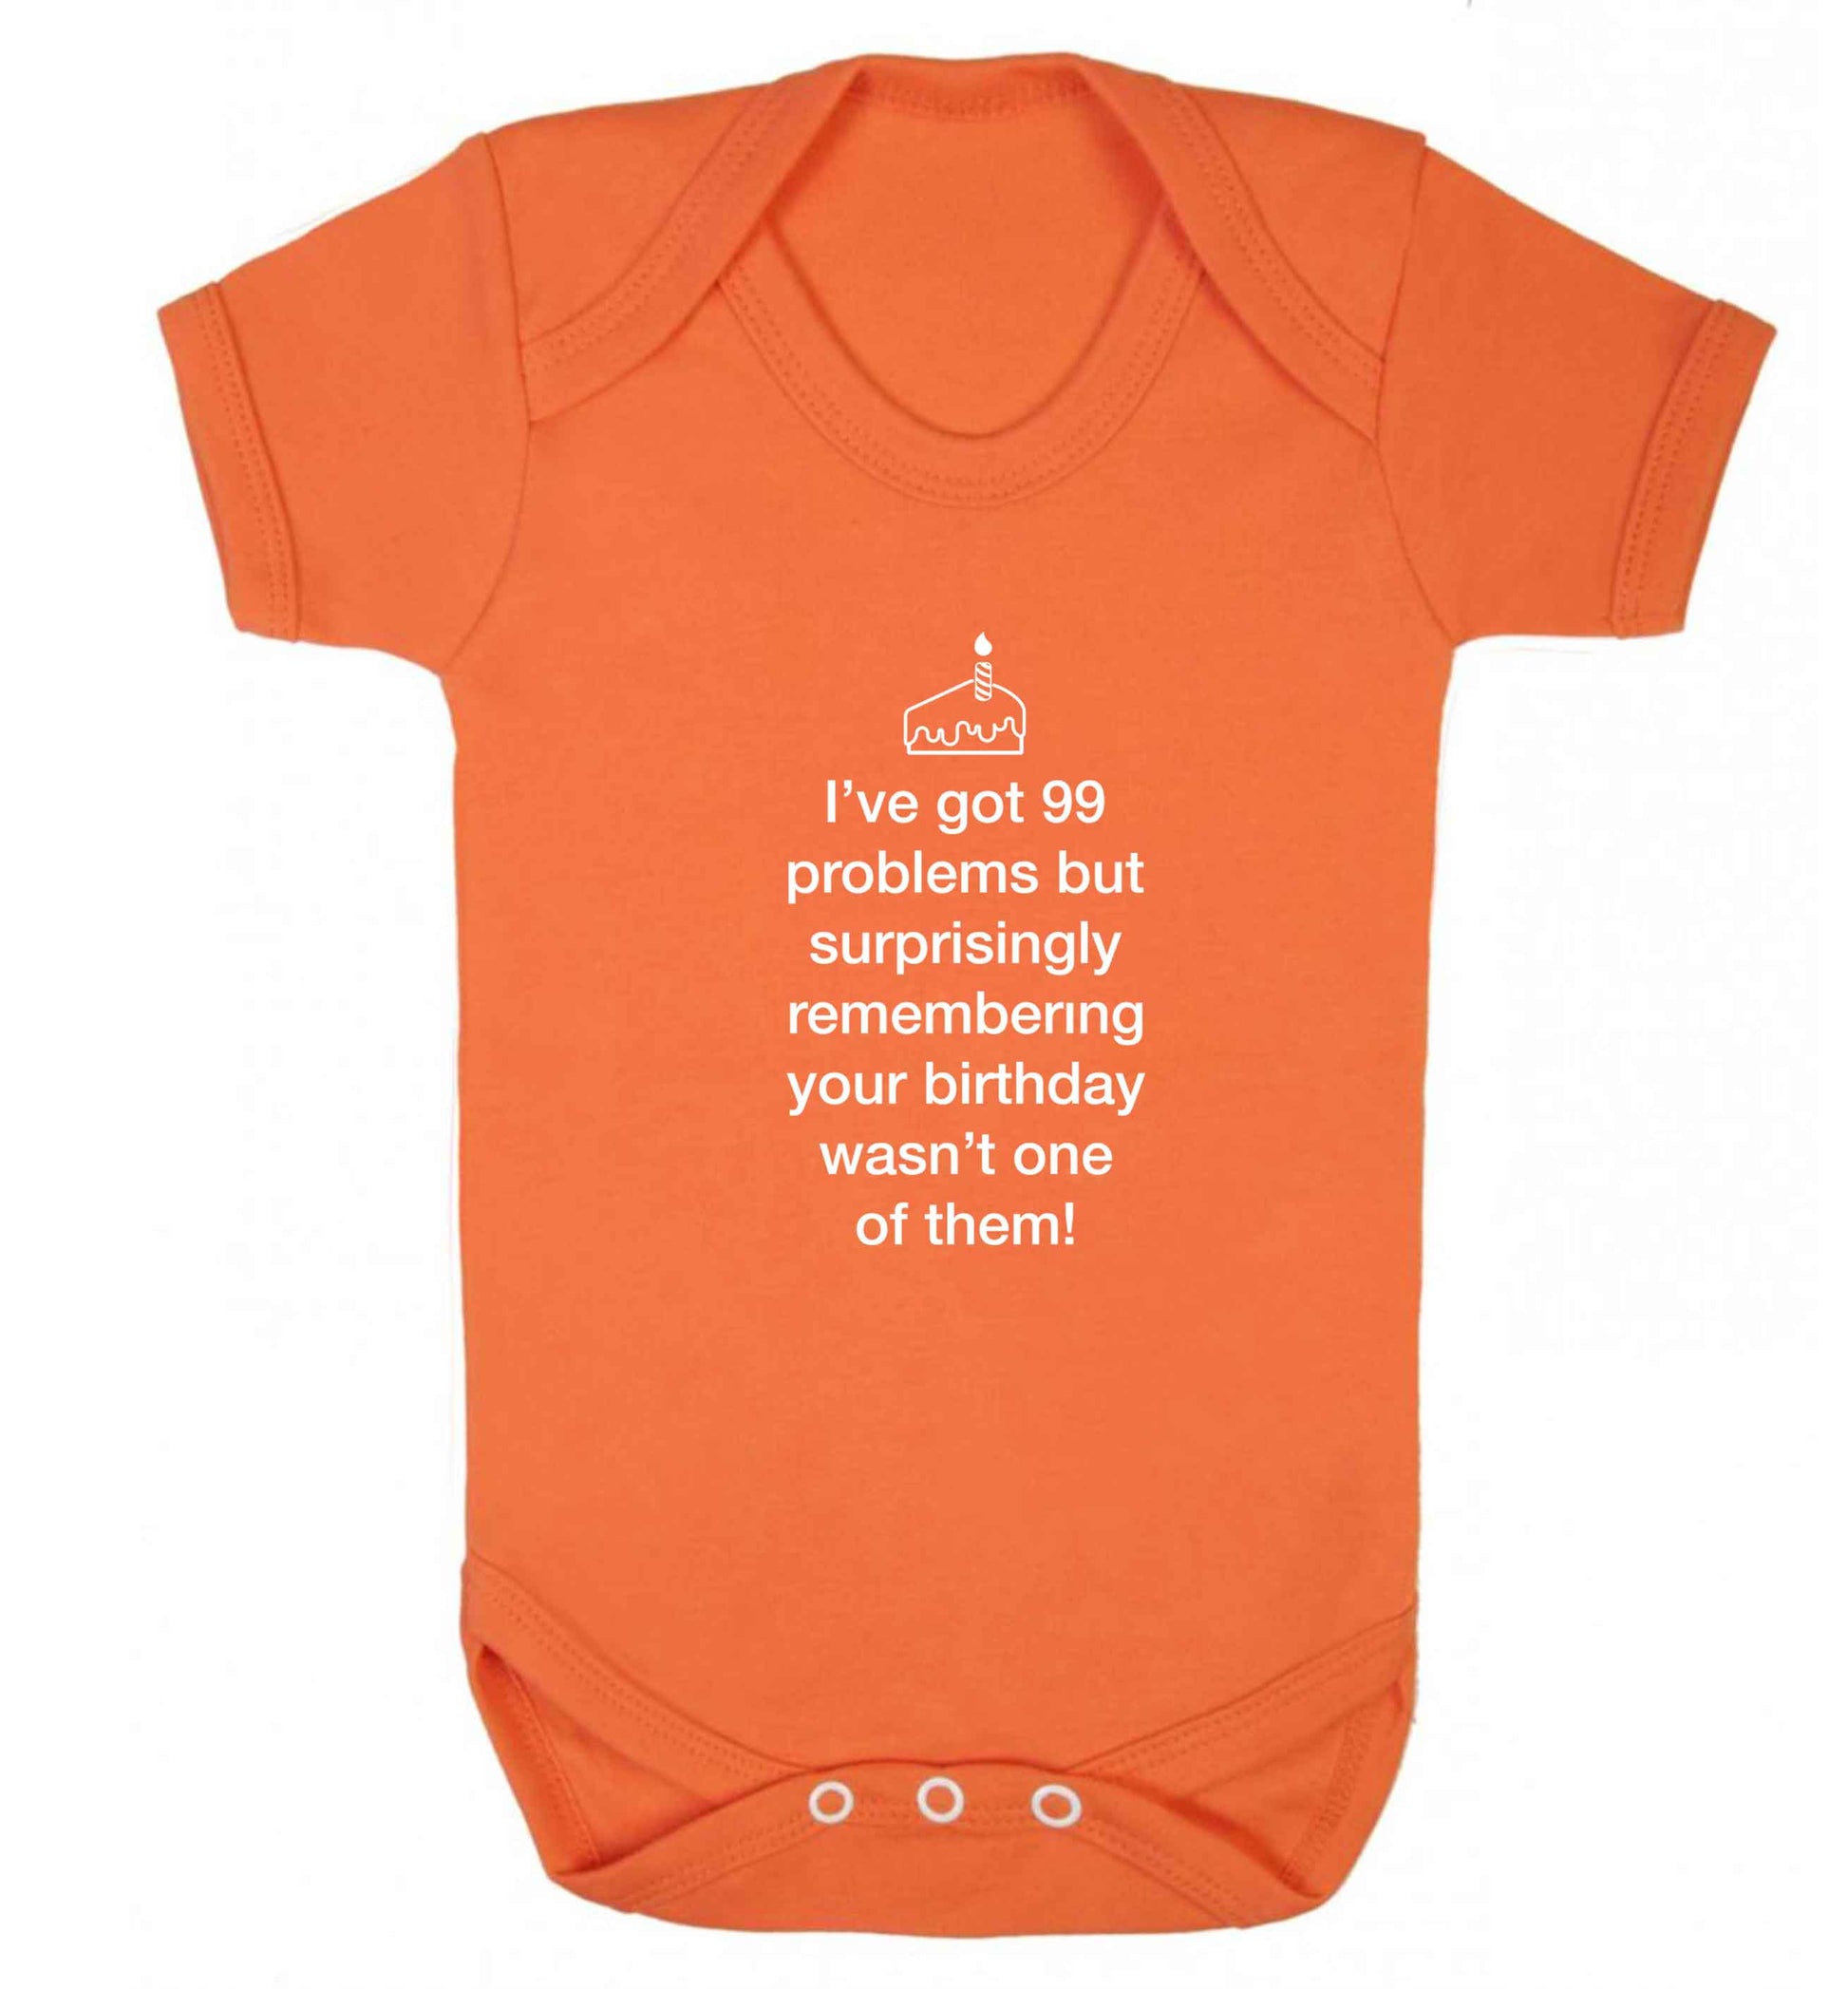 I've got 99 problems but surprisingly remembering your birthday wasn't one of them! baby vest orange 18-24 months